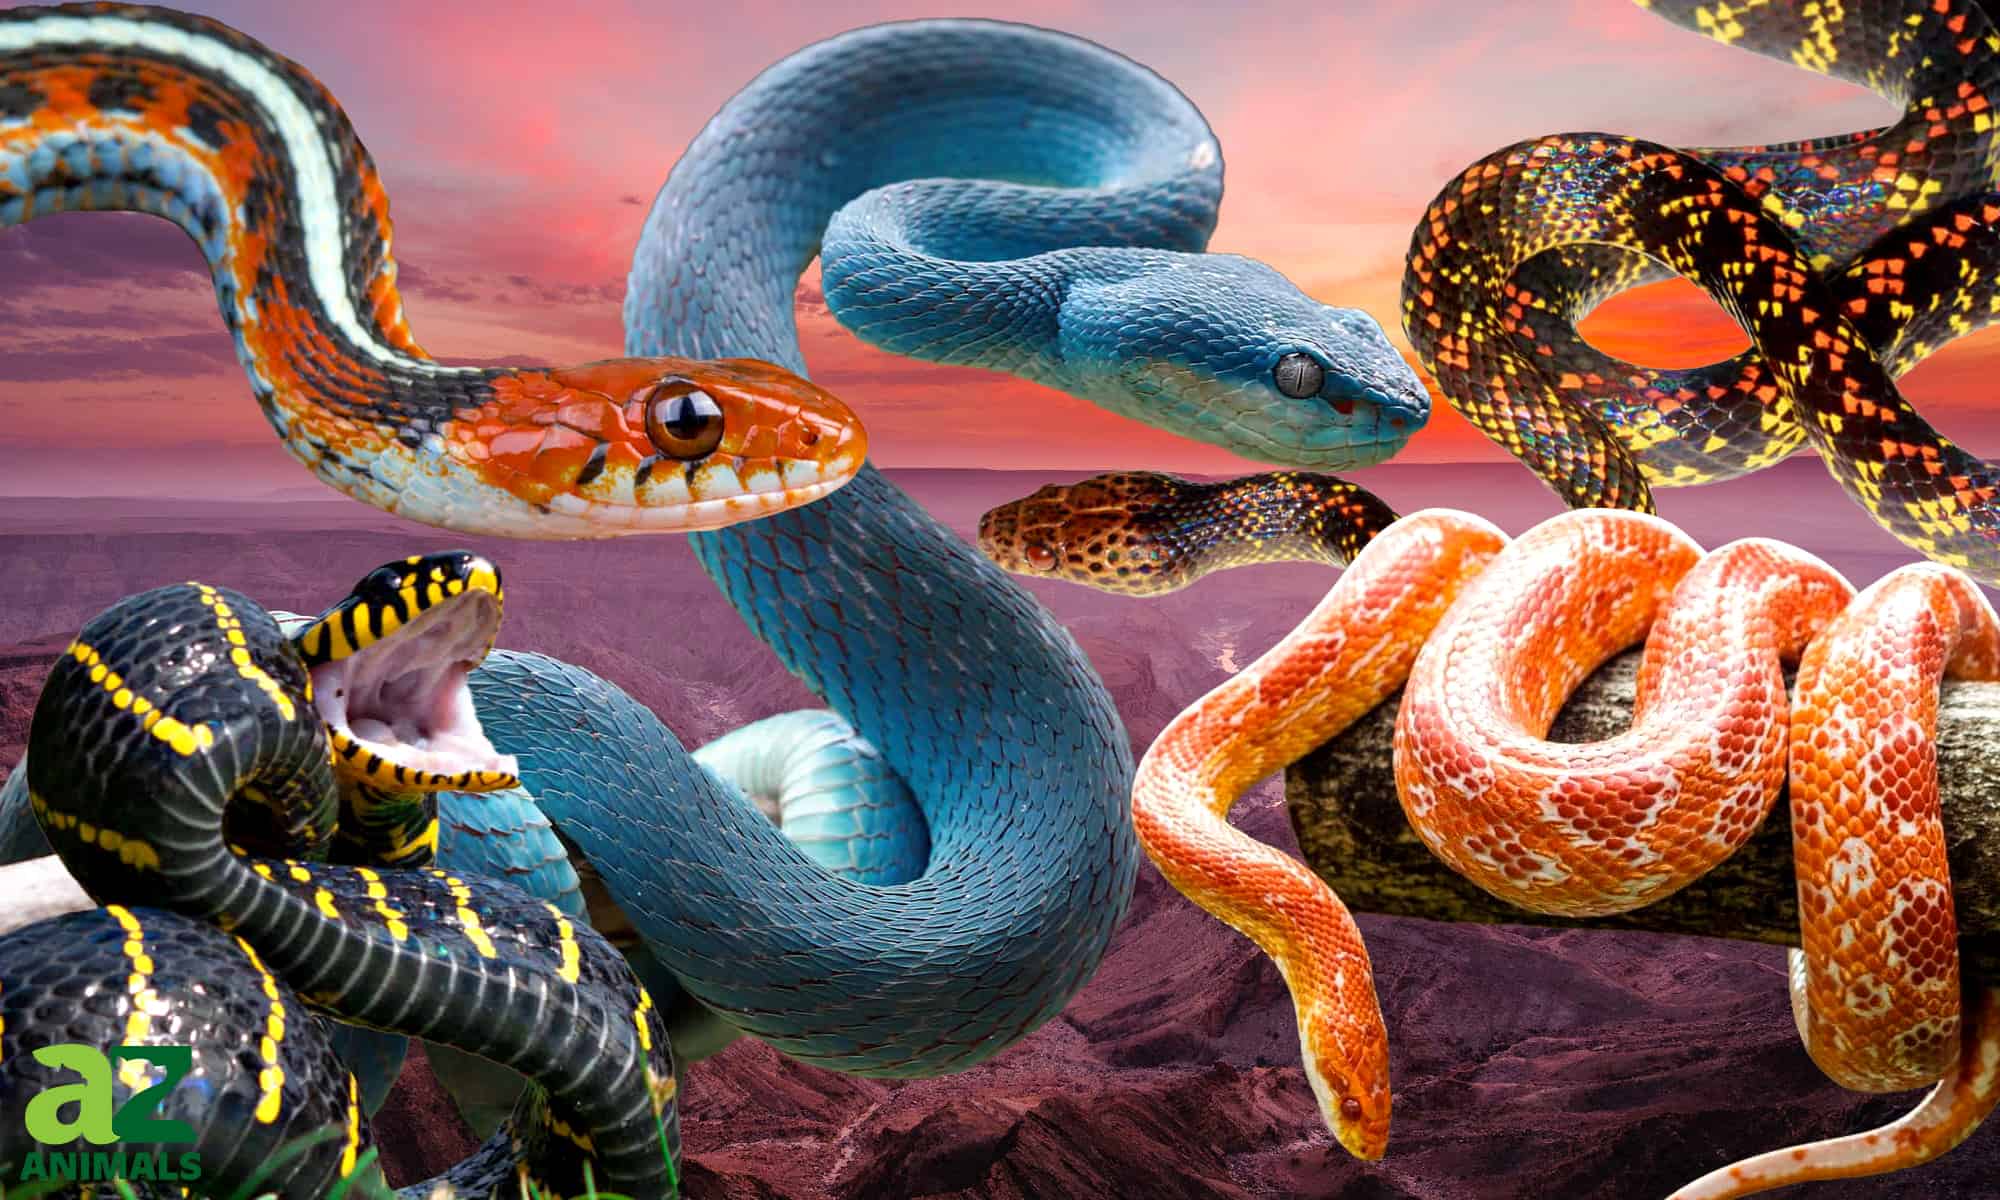 Discover the 10 Most Colorful Snakes in the World - AZ Animals